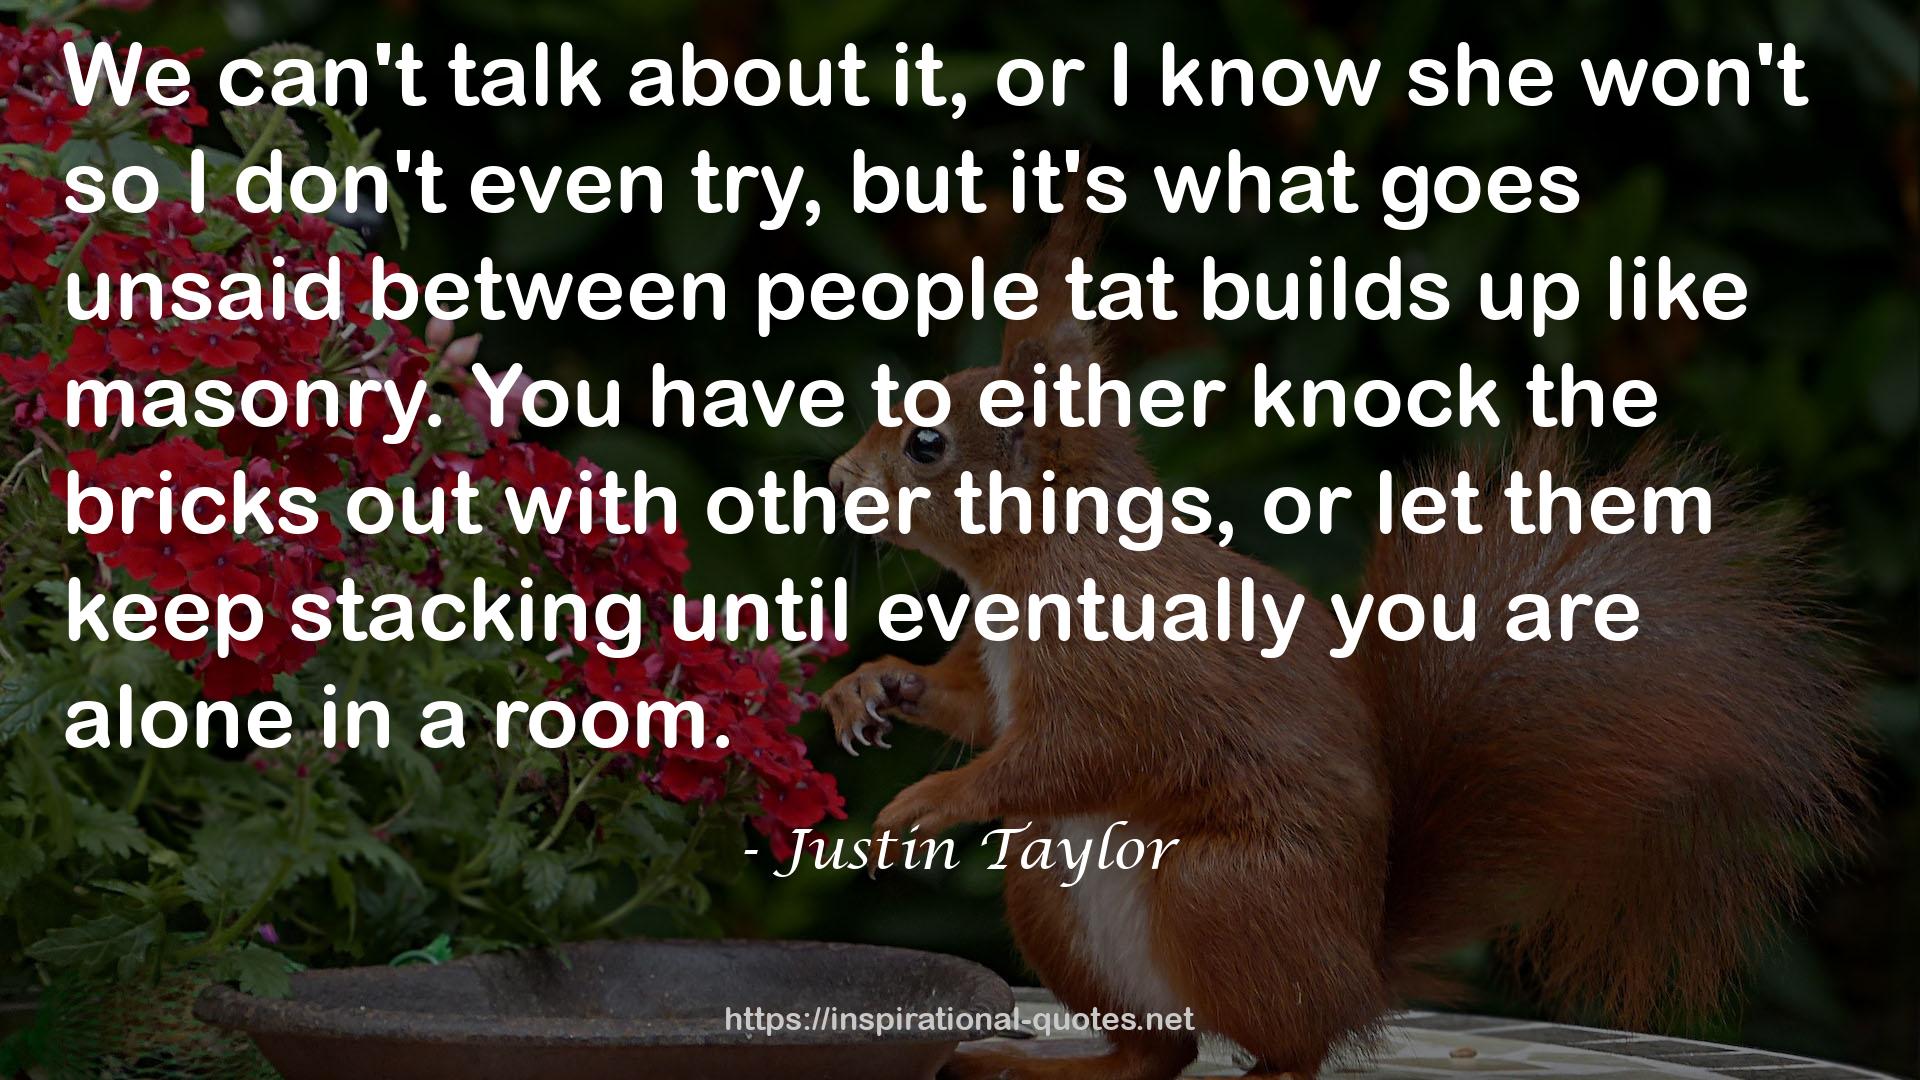 Justin Taylor QUOTES